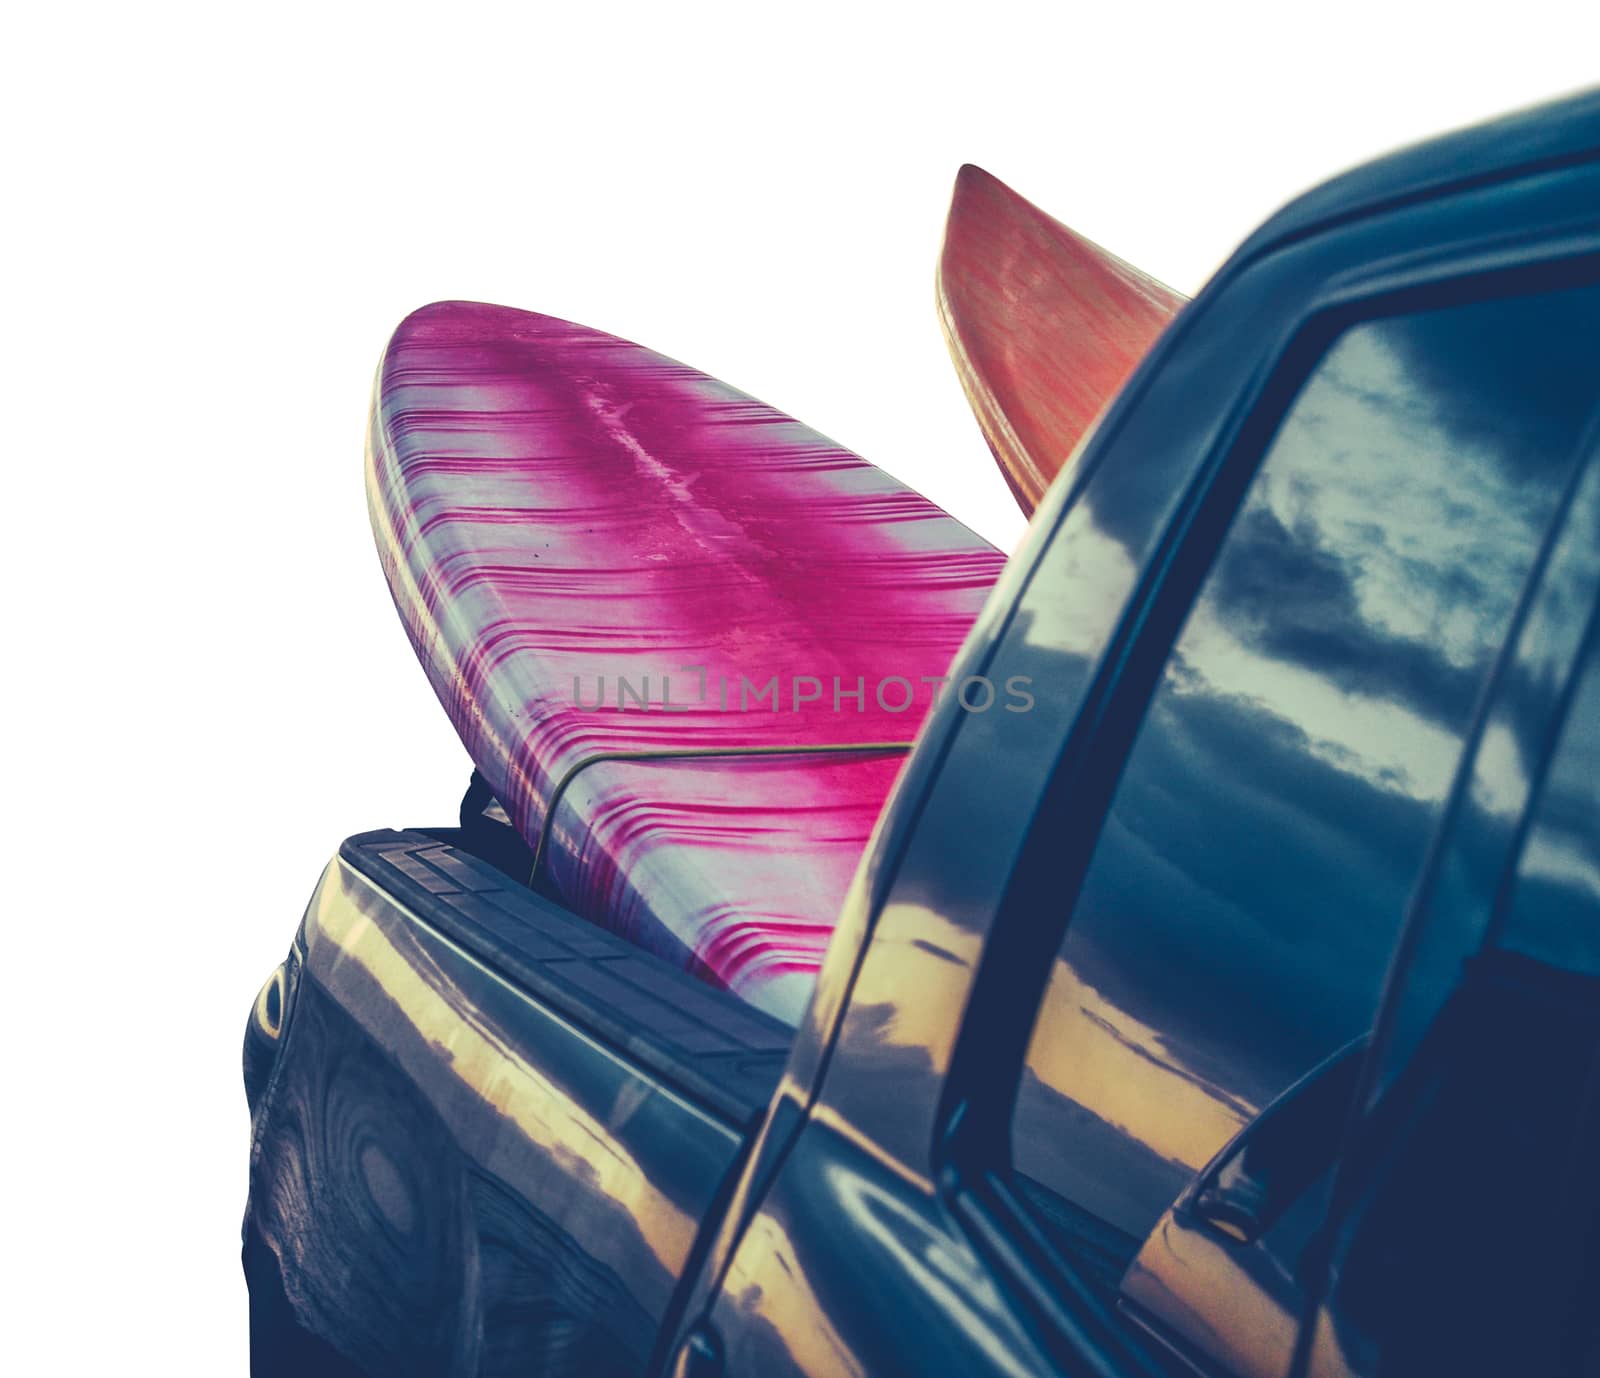 Retro Filtered Isolated Surfboards In A Truck At Sunset In Hawaii